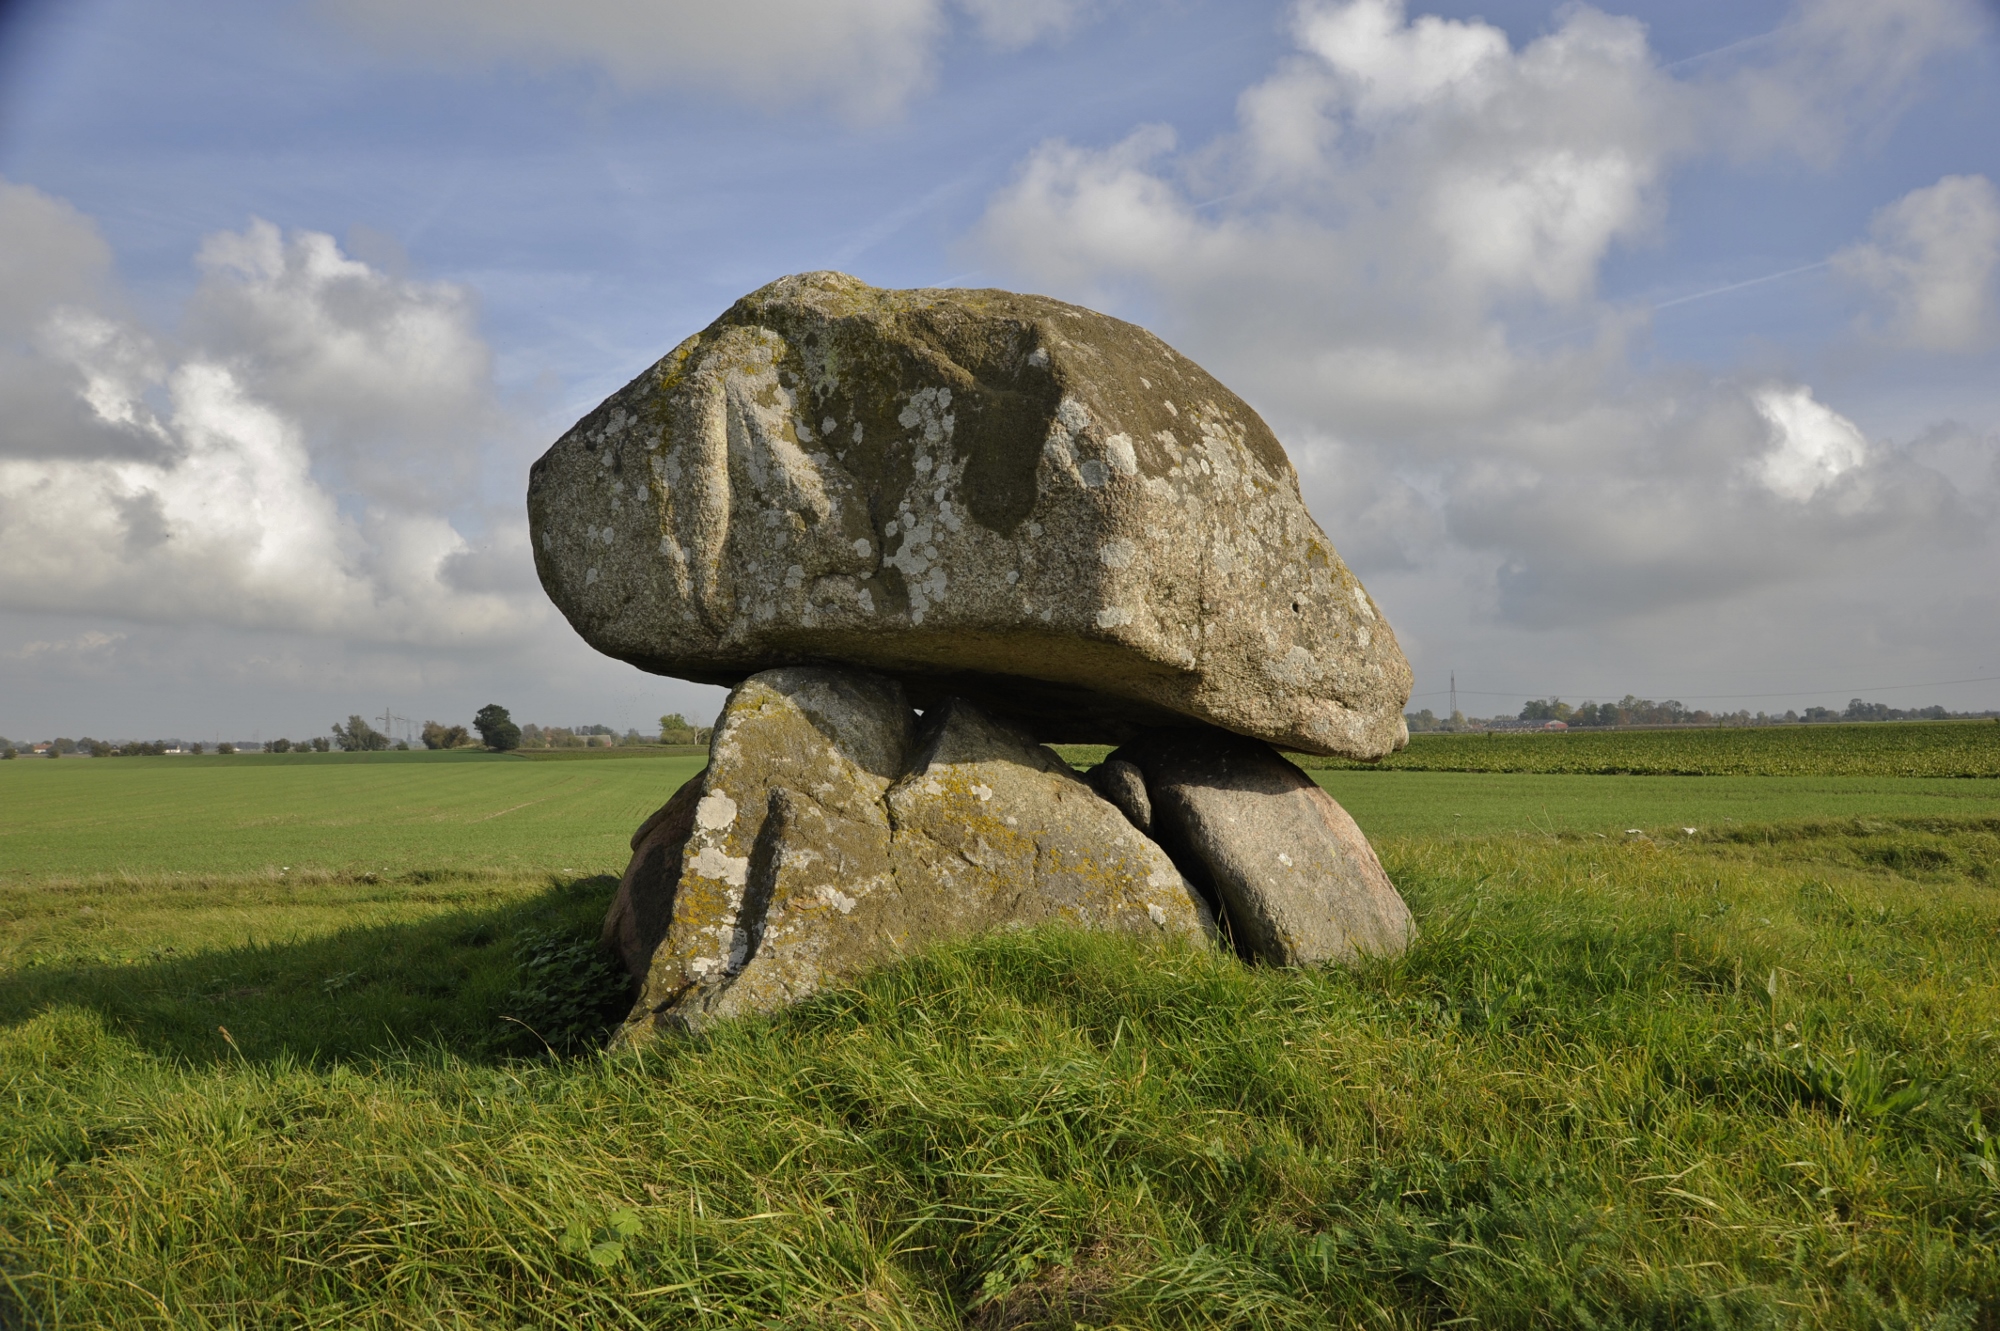 an image of a rock out in the field